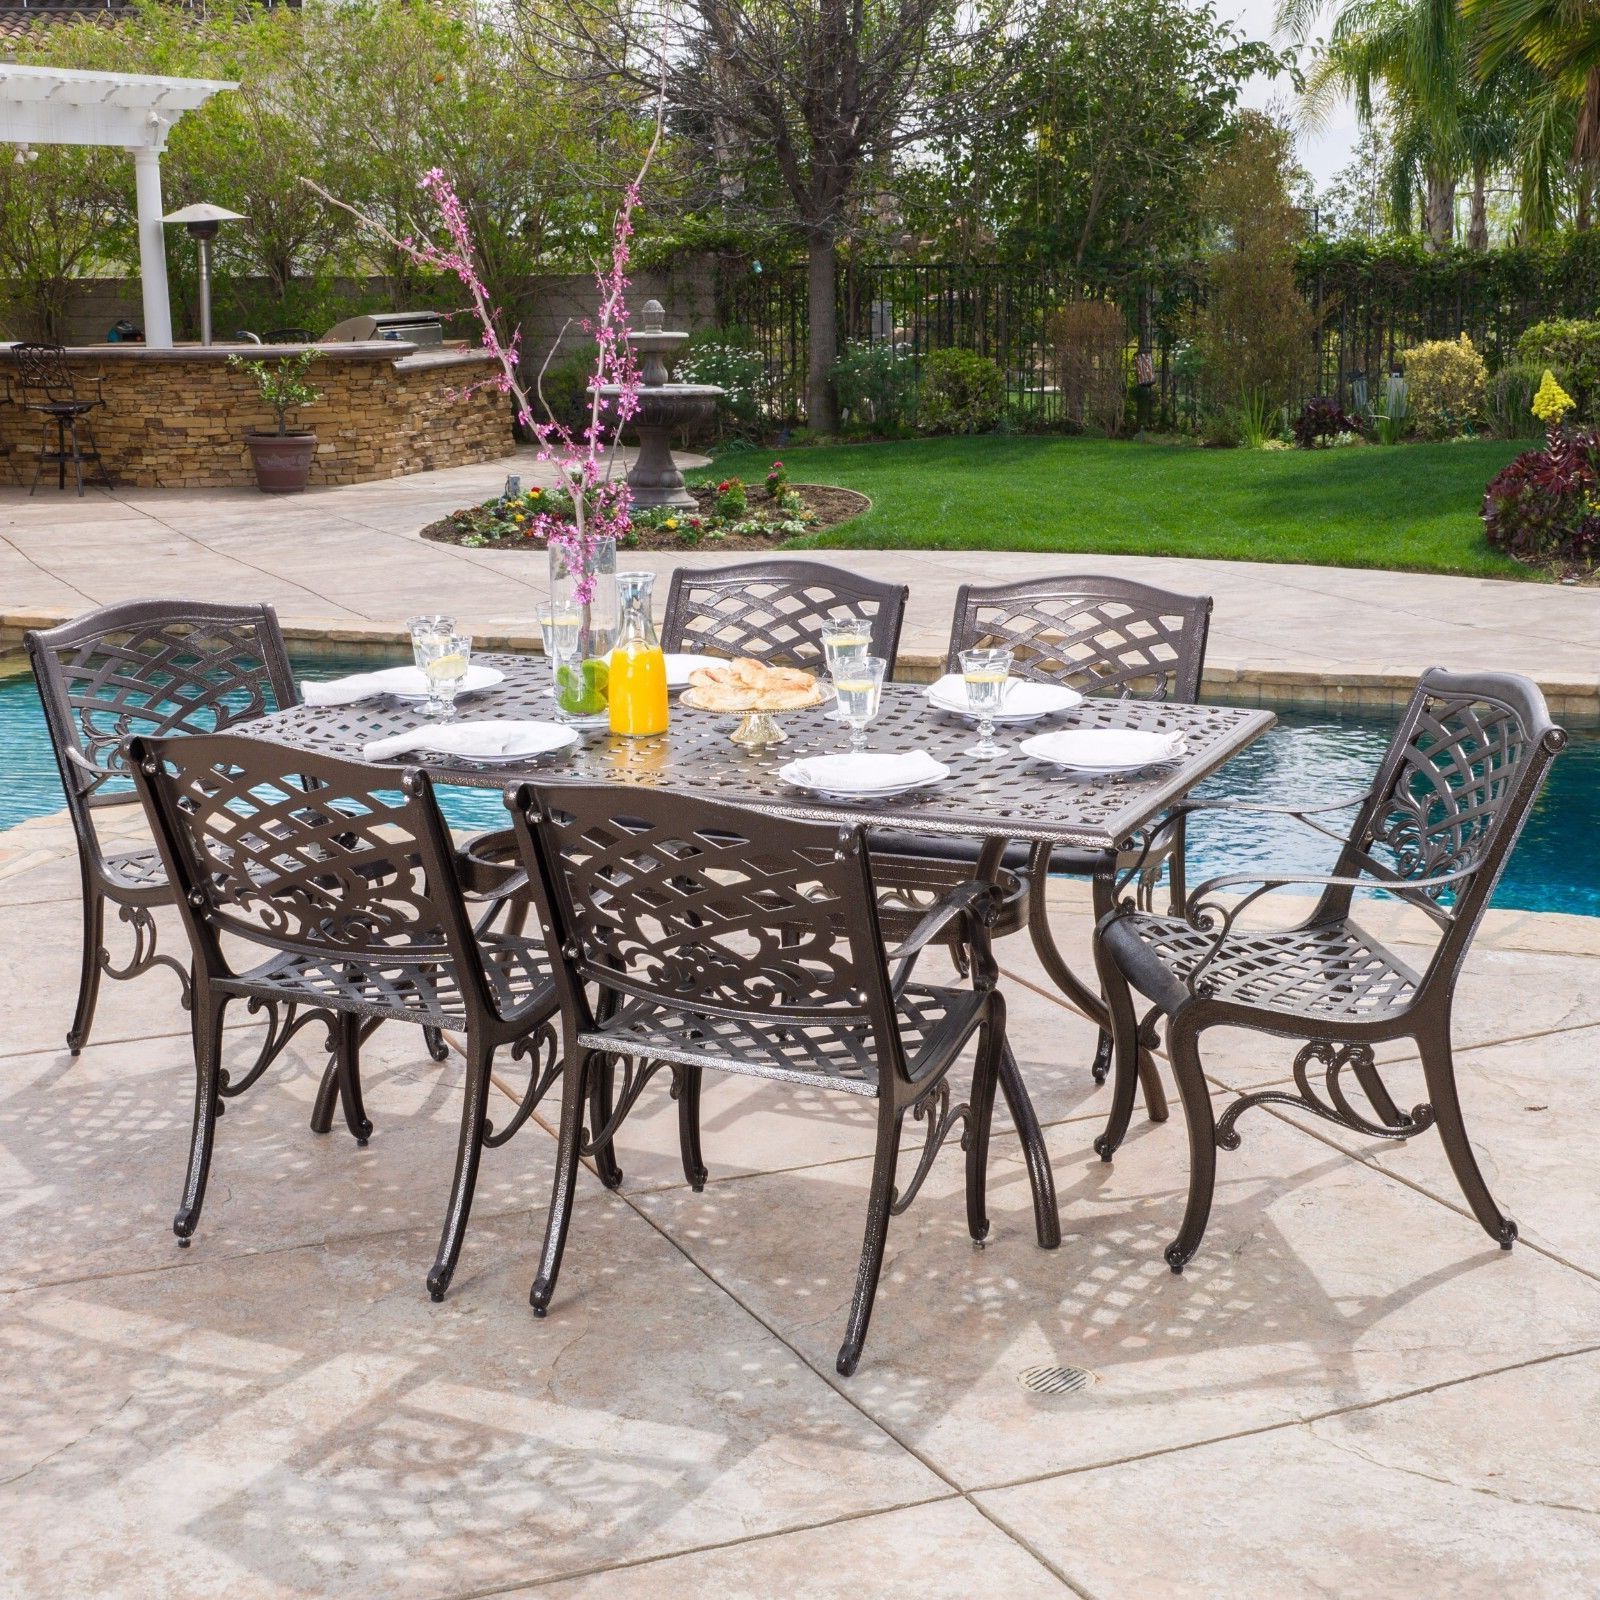 Odena Outdoor 7 Piece Cast Aluminum Rectangle Bronze Dining Set Intended For Most Popular 7 Piece Rectangular Patio Dining Sets (View 3 of 15)